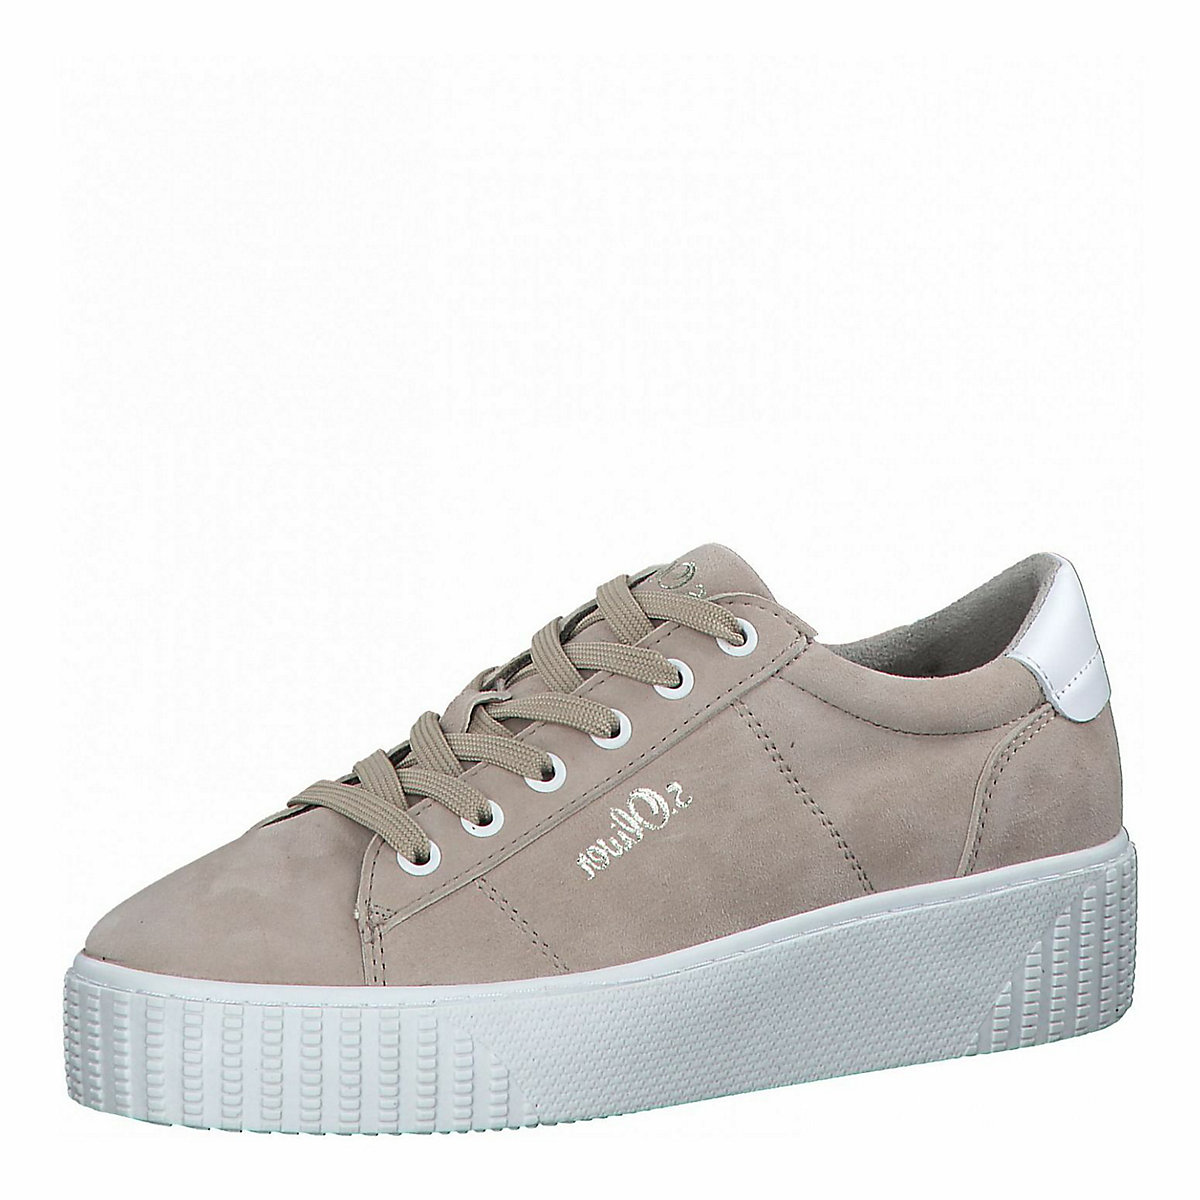 s.Oliver s.Oliver Sneaker Sneakers Low beige